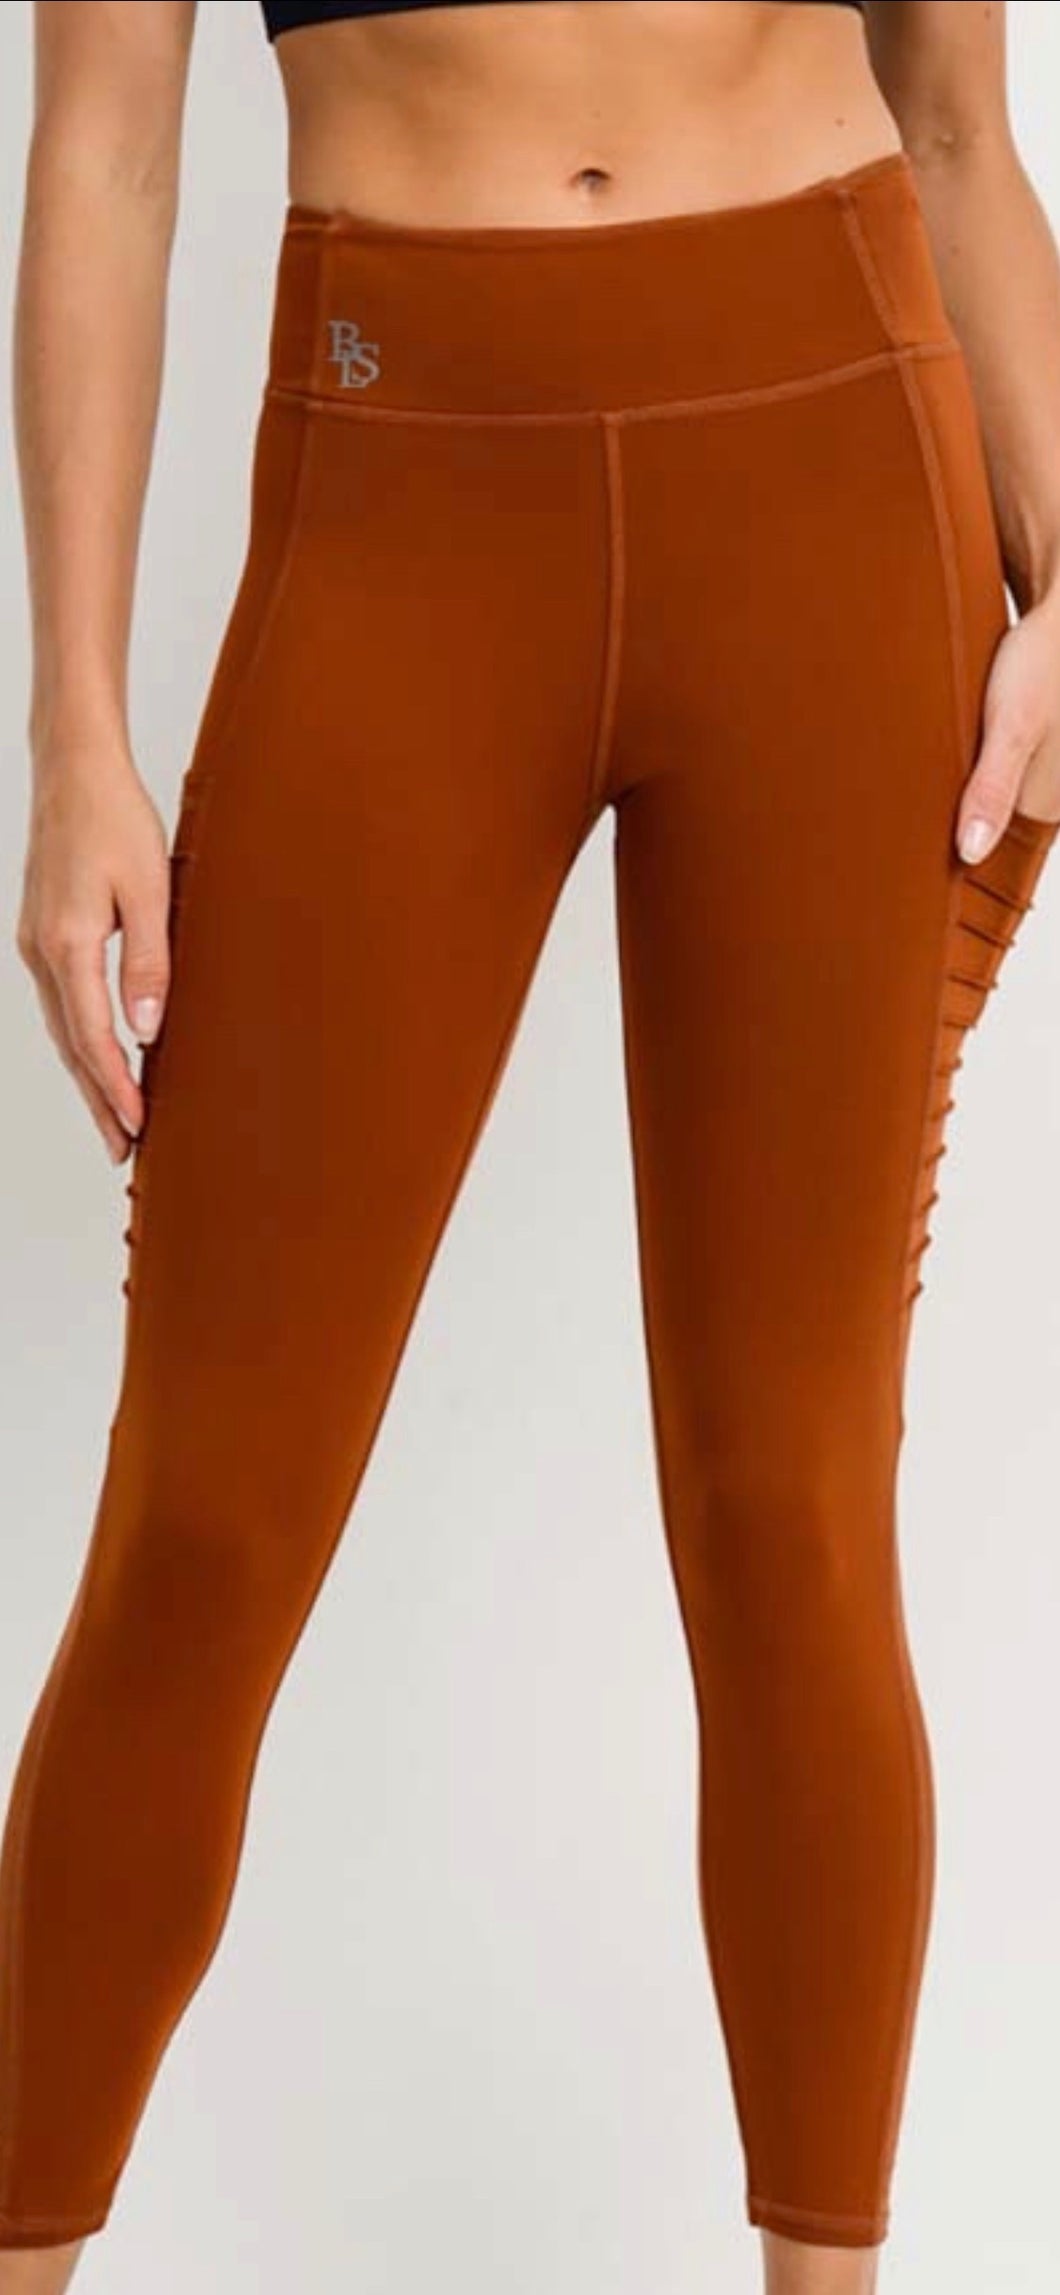 HIIT Leggings With Side Pockets In Mixed Rib In Sage-Brown for Women